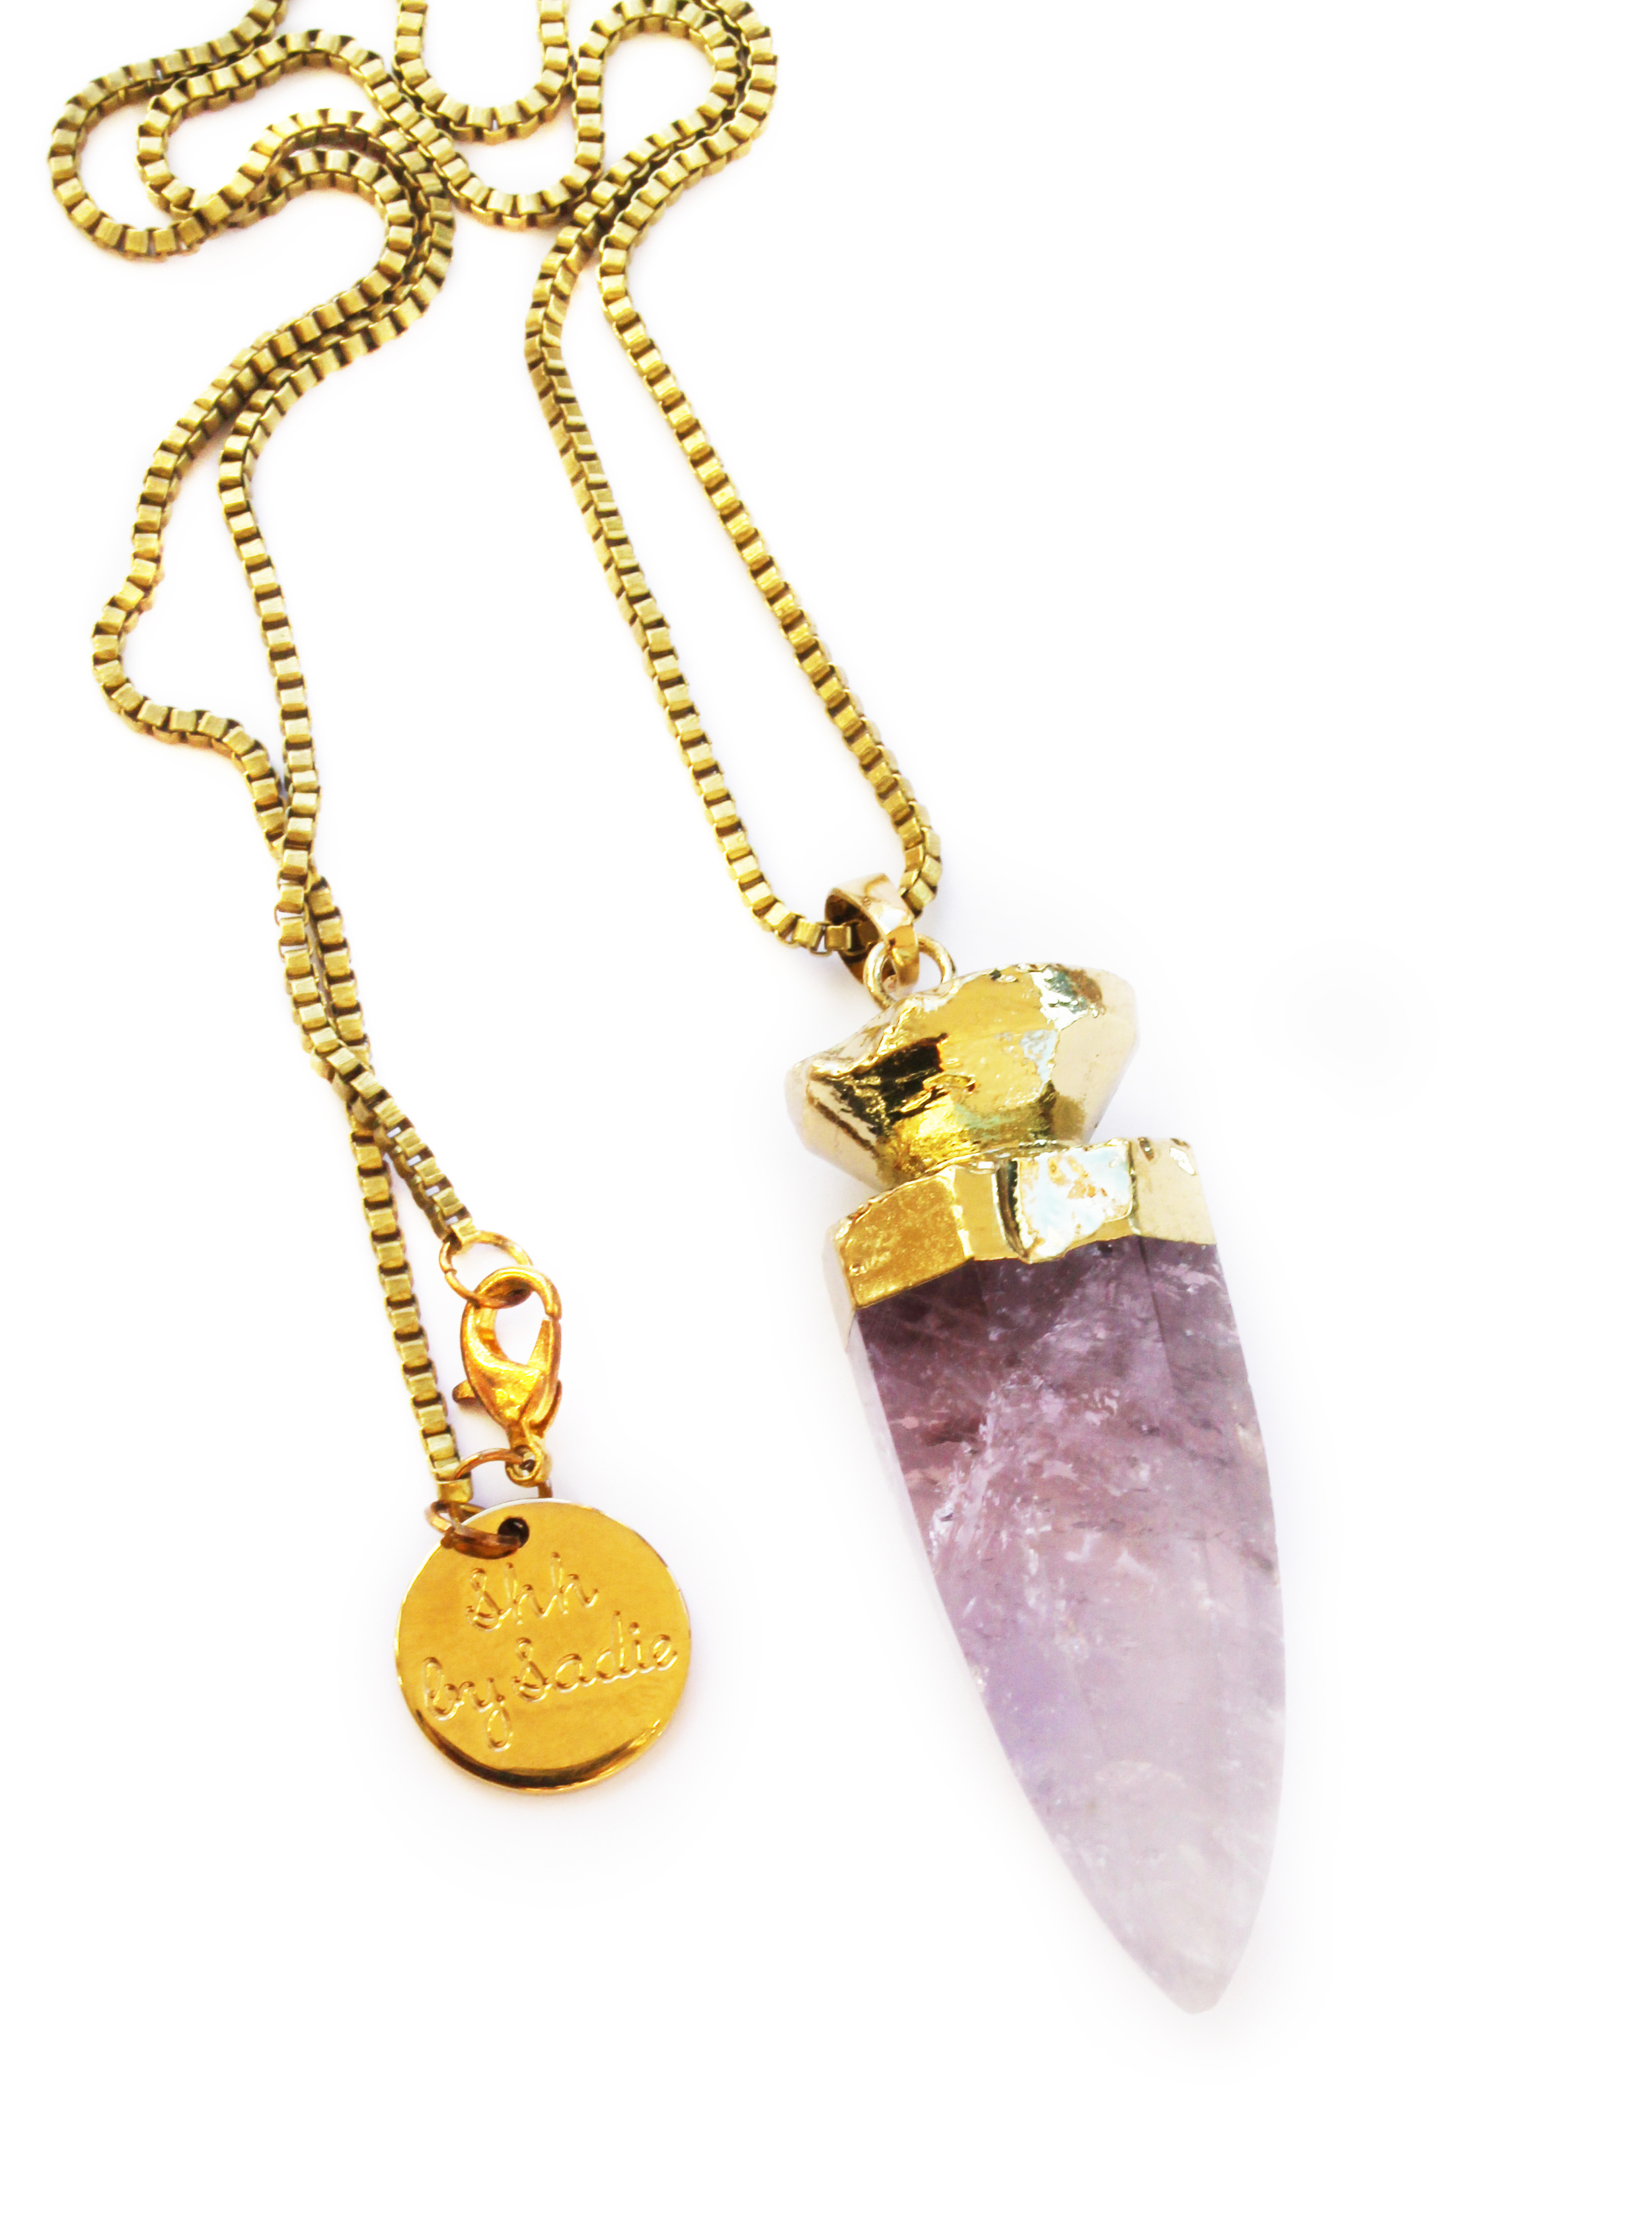 Chunky amethyst pendant with gold box chain statement necklace by NZ jewellery designer Shh by Sadie